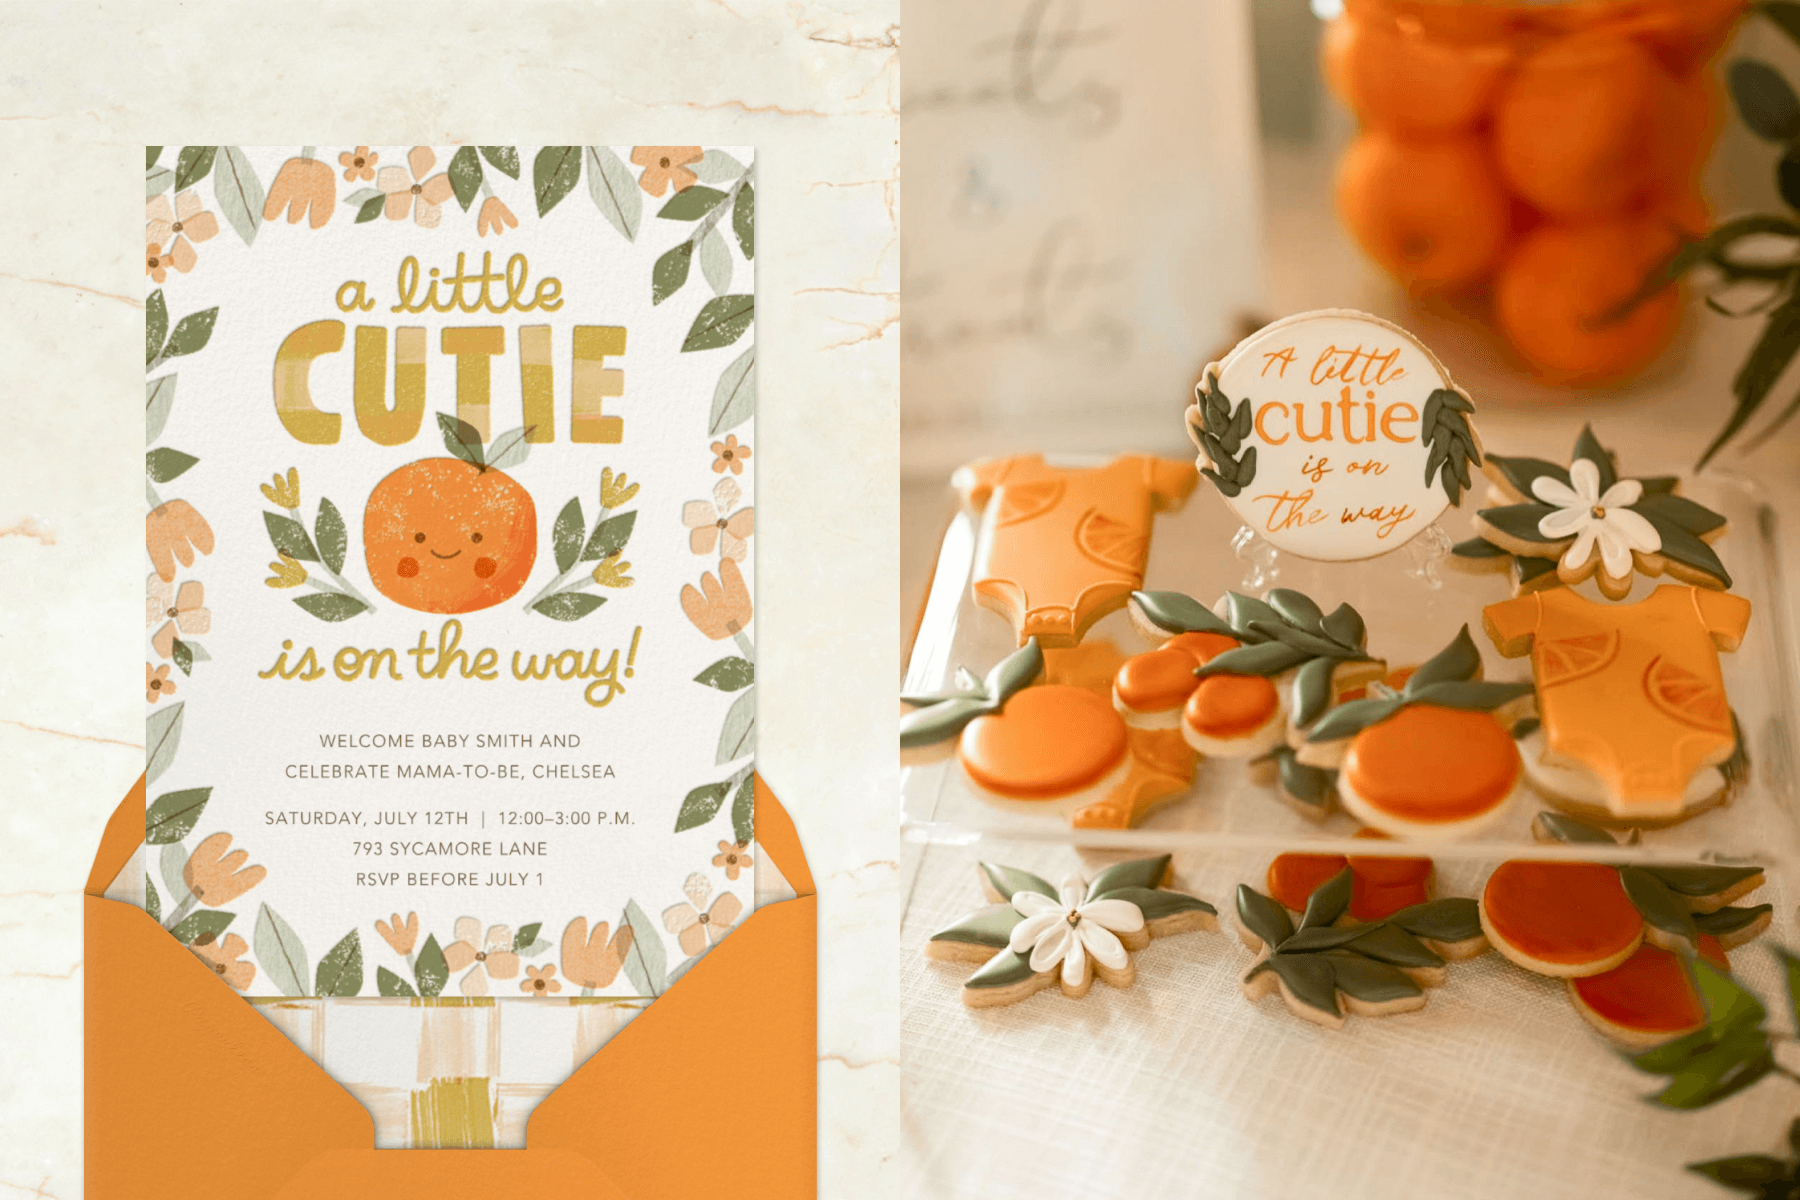 An invitation with a smiling oranges says ‘a little cutie is on the way!’; decorated sugar cookies in an orange/cutie theme.